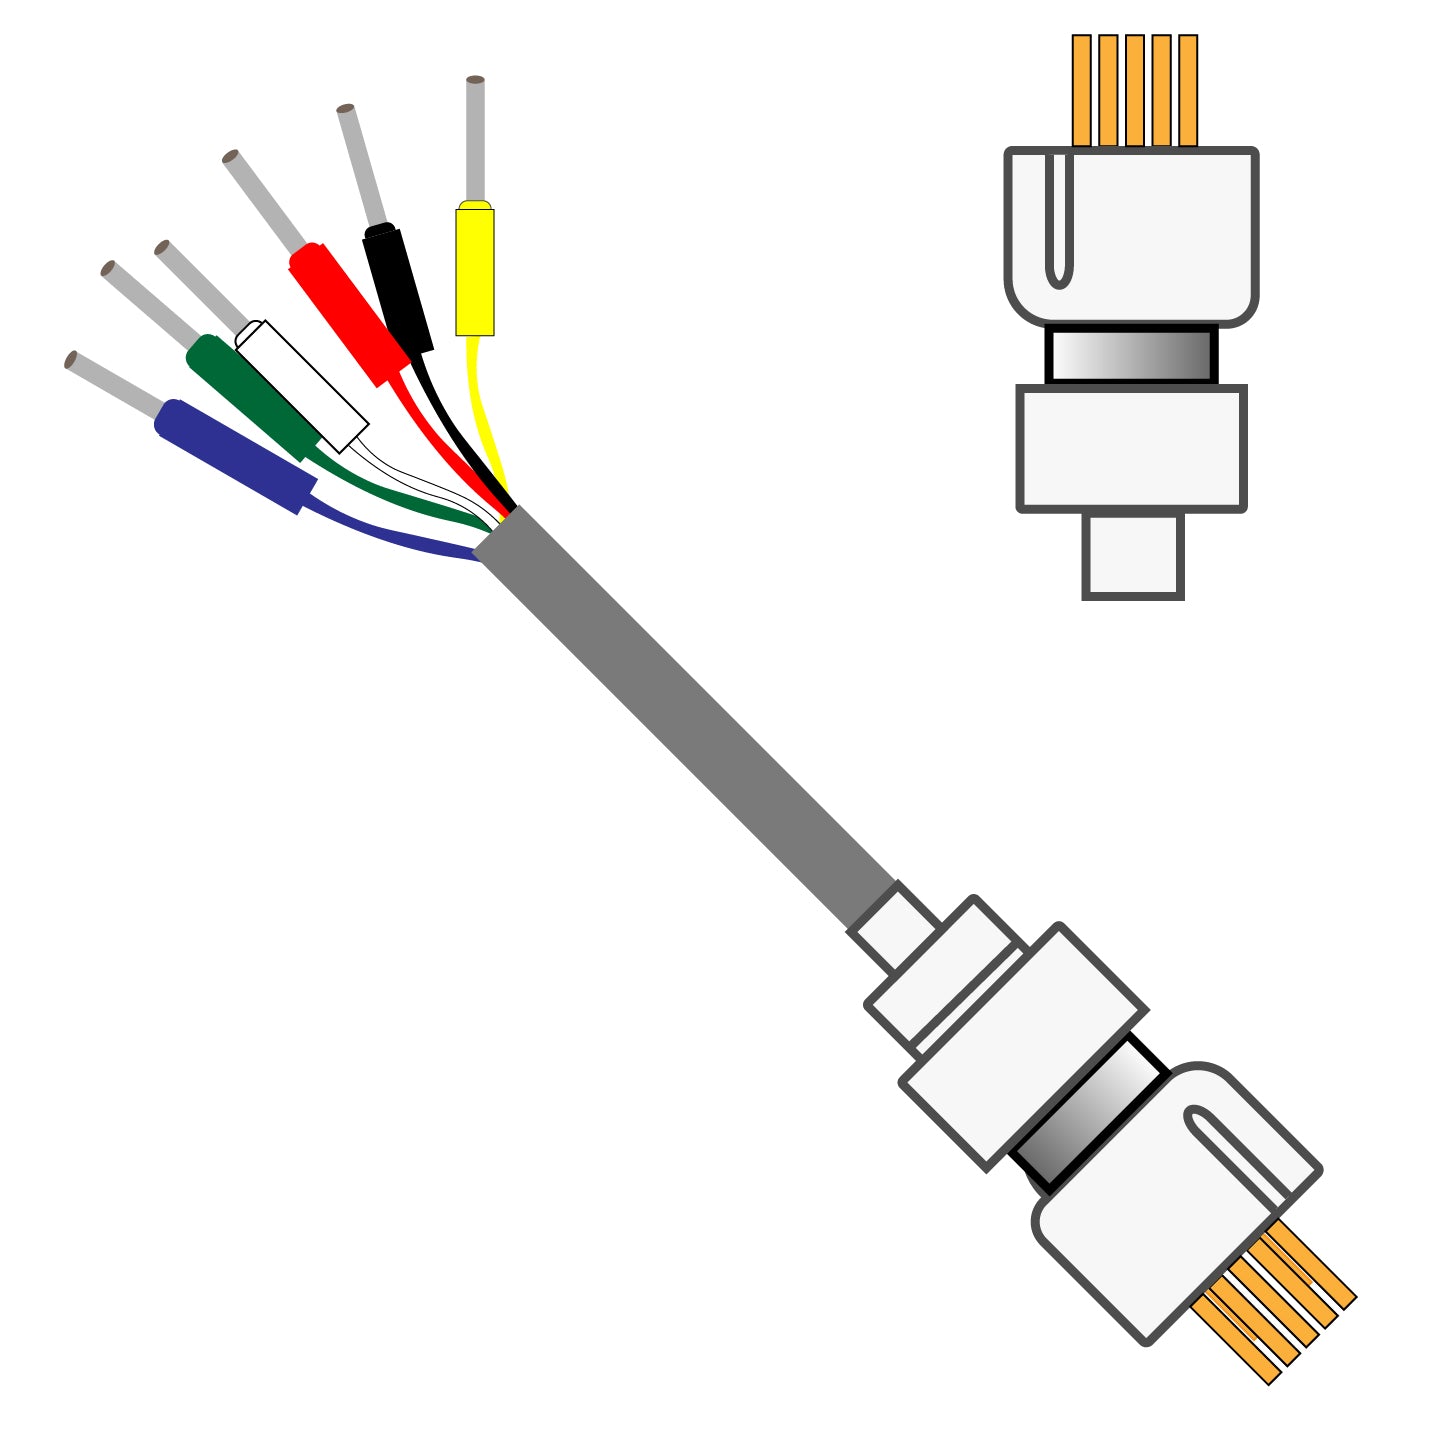 6 Channel Cable 363-SL/6 With Spring